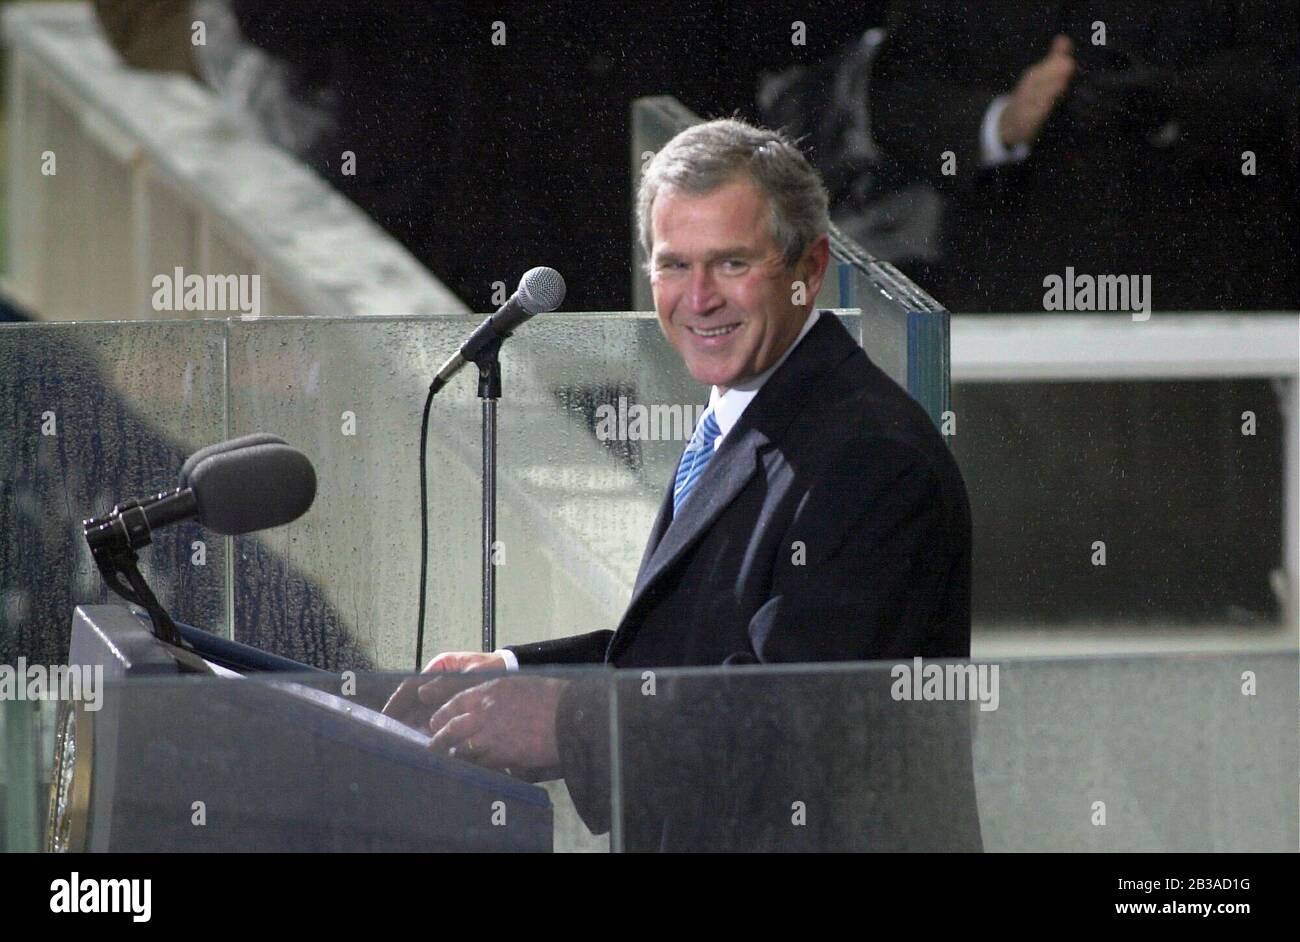 Washington, D.C. USA, Jan. 20 2001:  Pres. George W. Bush gives his inaugural address after being sworn in as the 43rd President of the United States. ©Bob Daemmrich Stock Photo